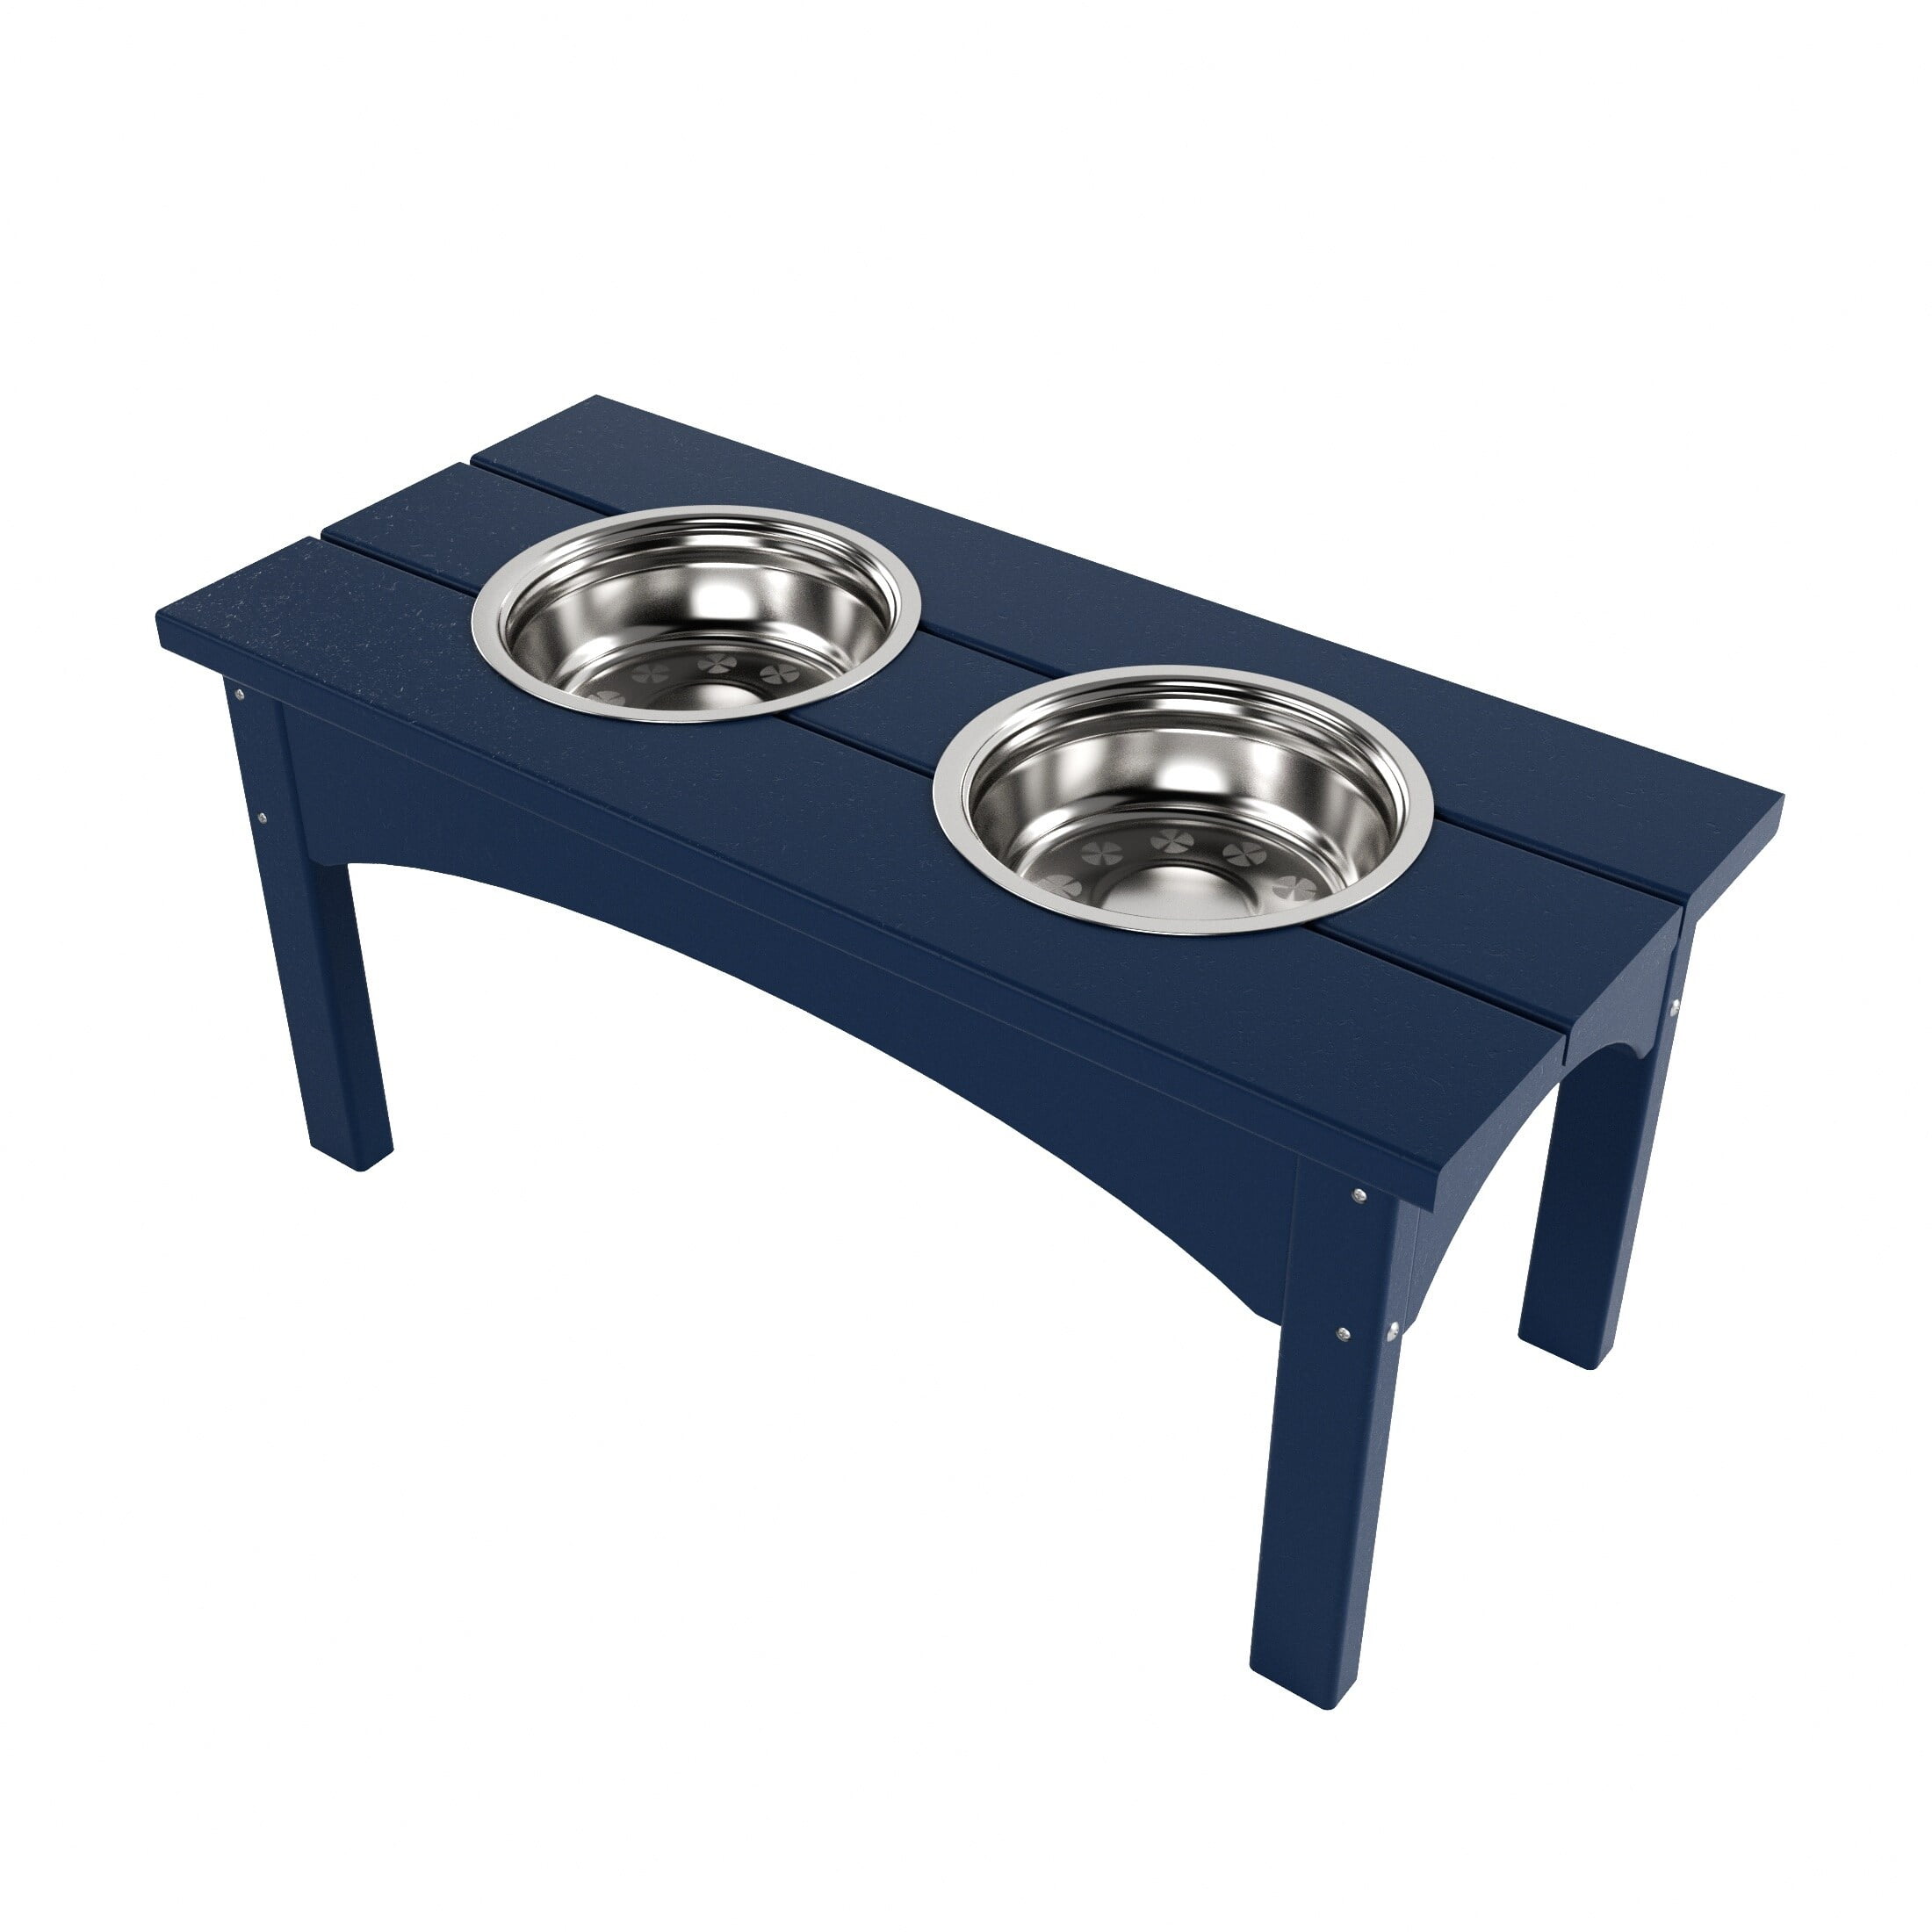 Pet Adobe Stainless Steel Elevated Pet Bowls - Stainless Steel - 20341498